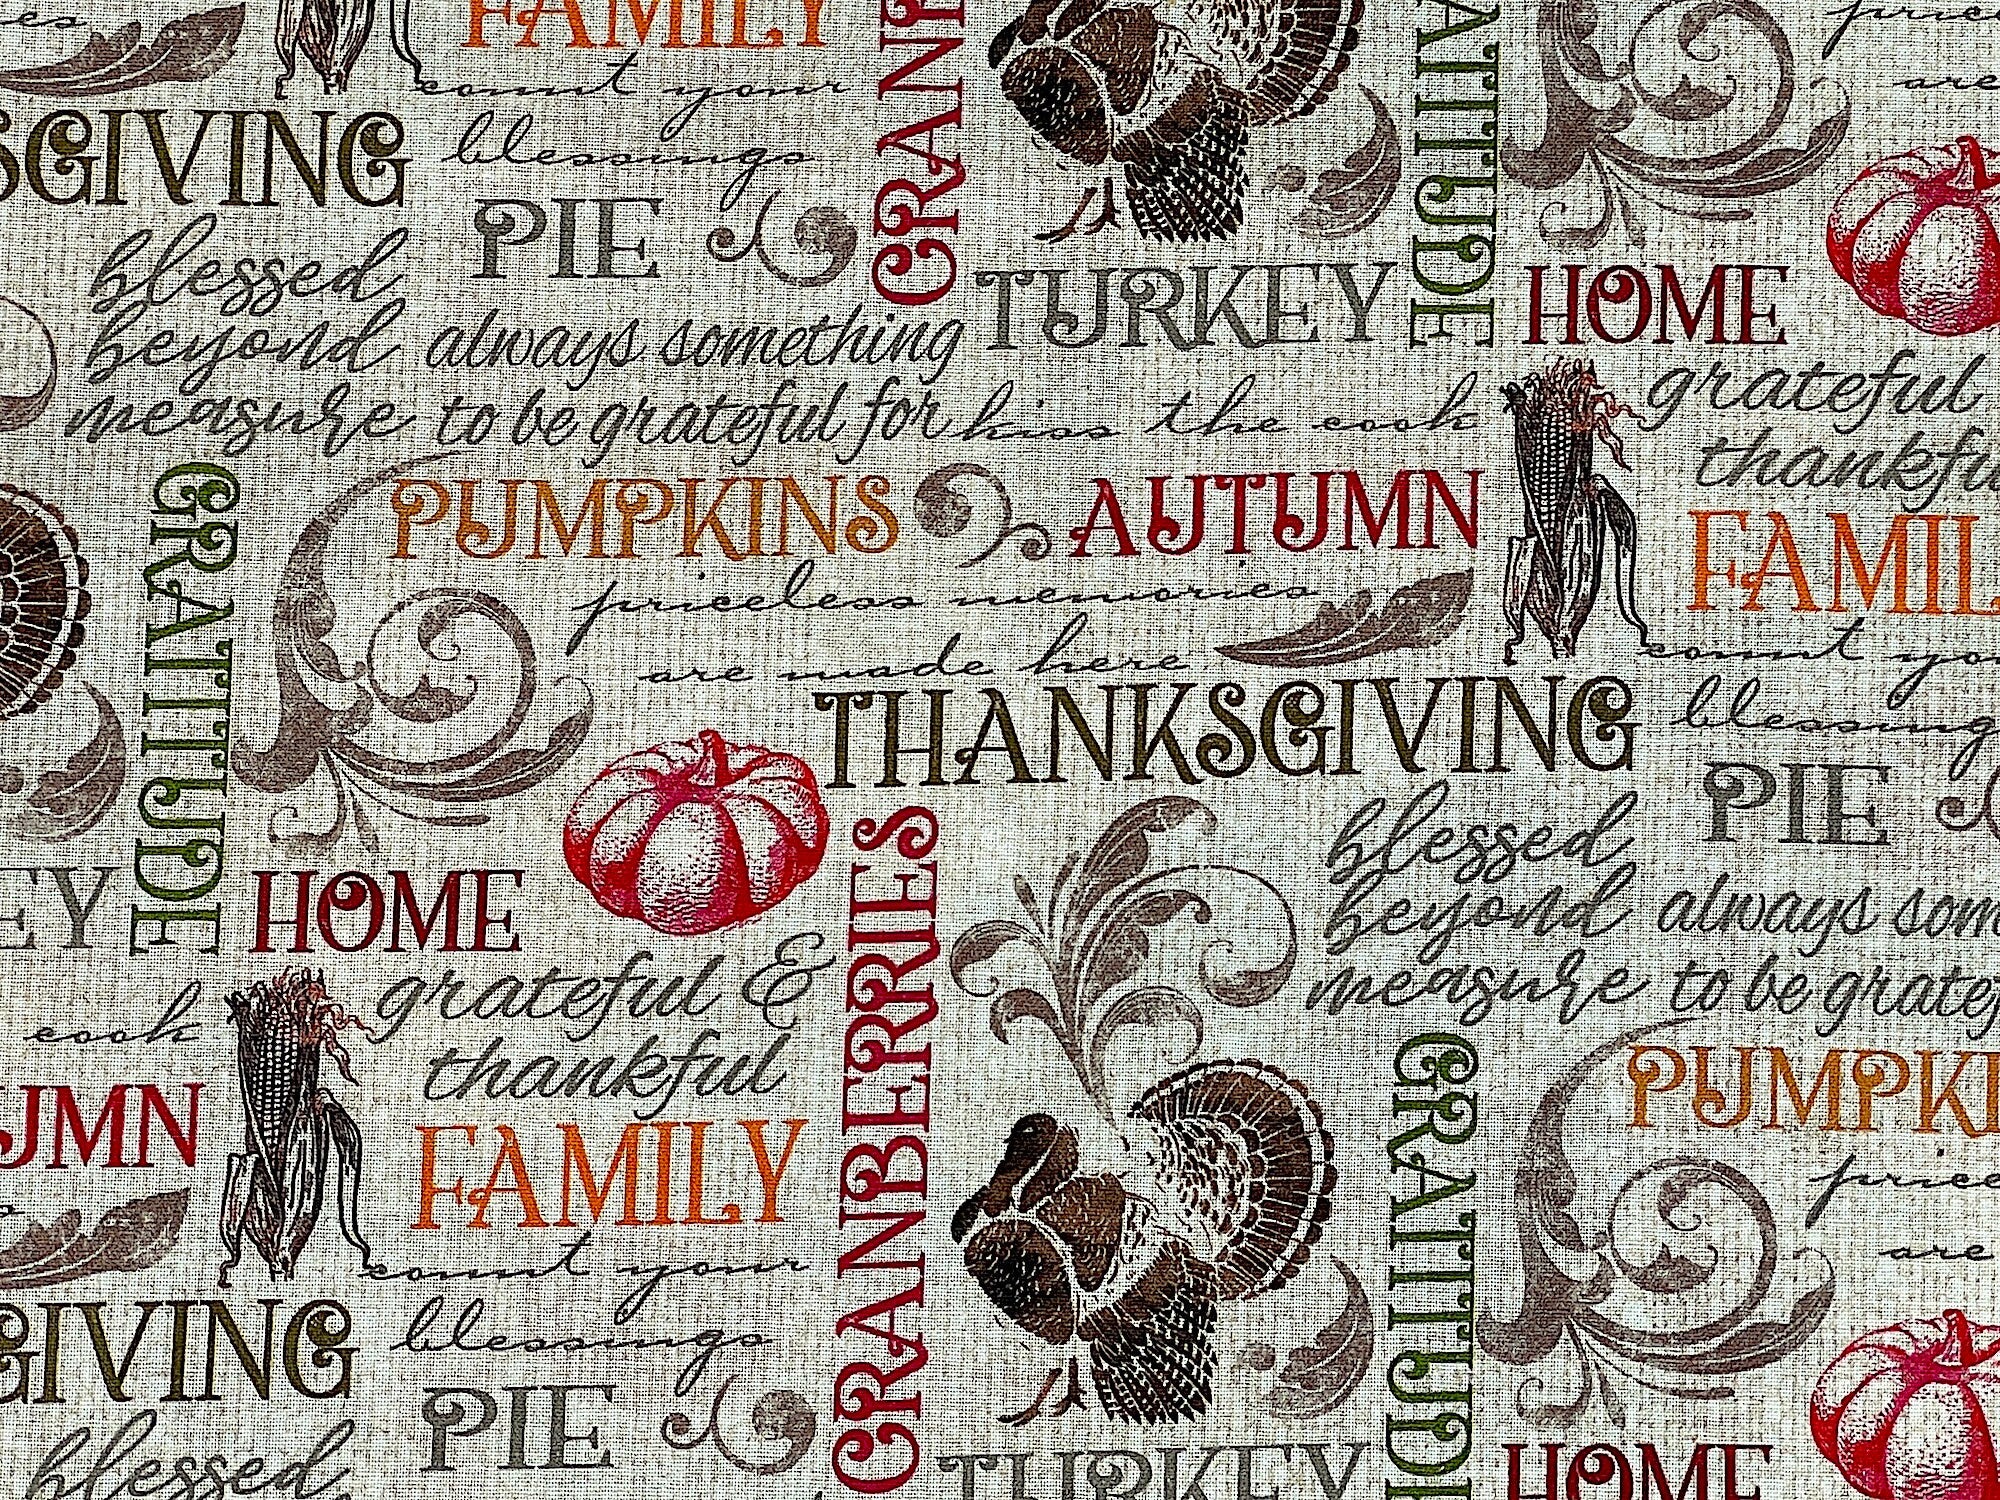 Close up of words such as pumpkins, autumn, family, Thanksgiving, home and more.